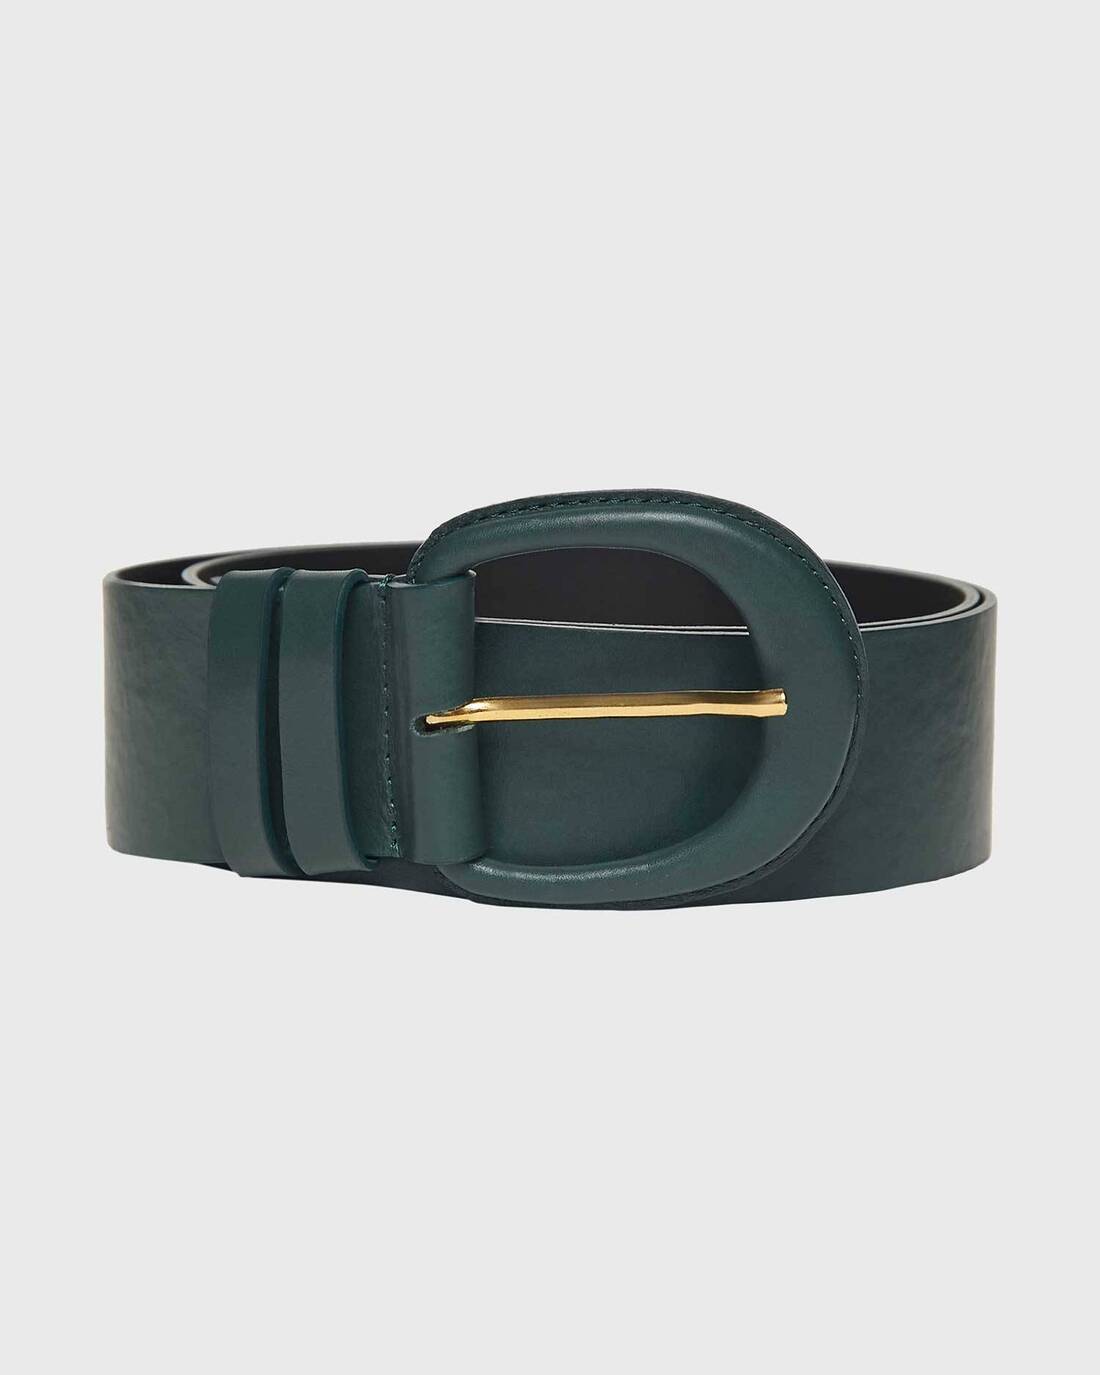 Round buckled leather belt